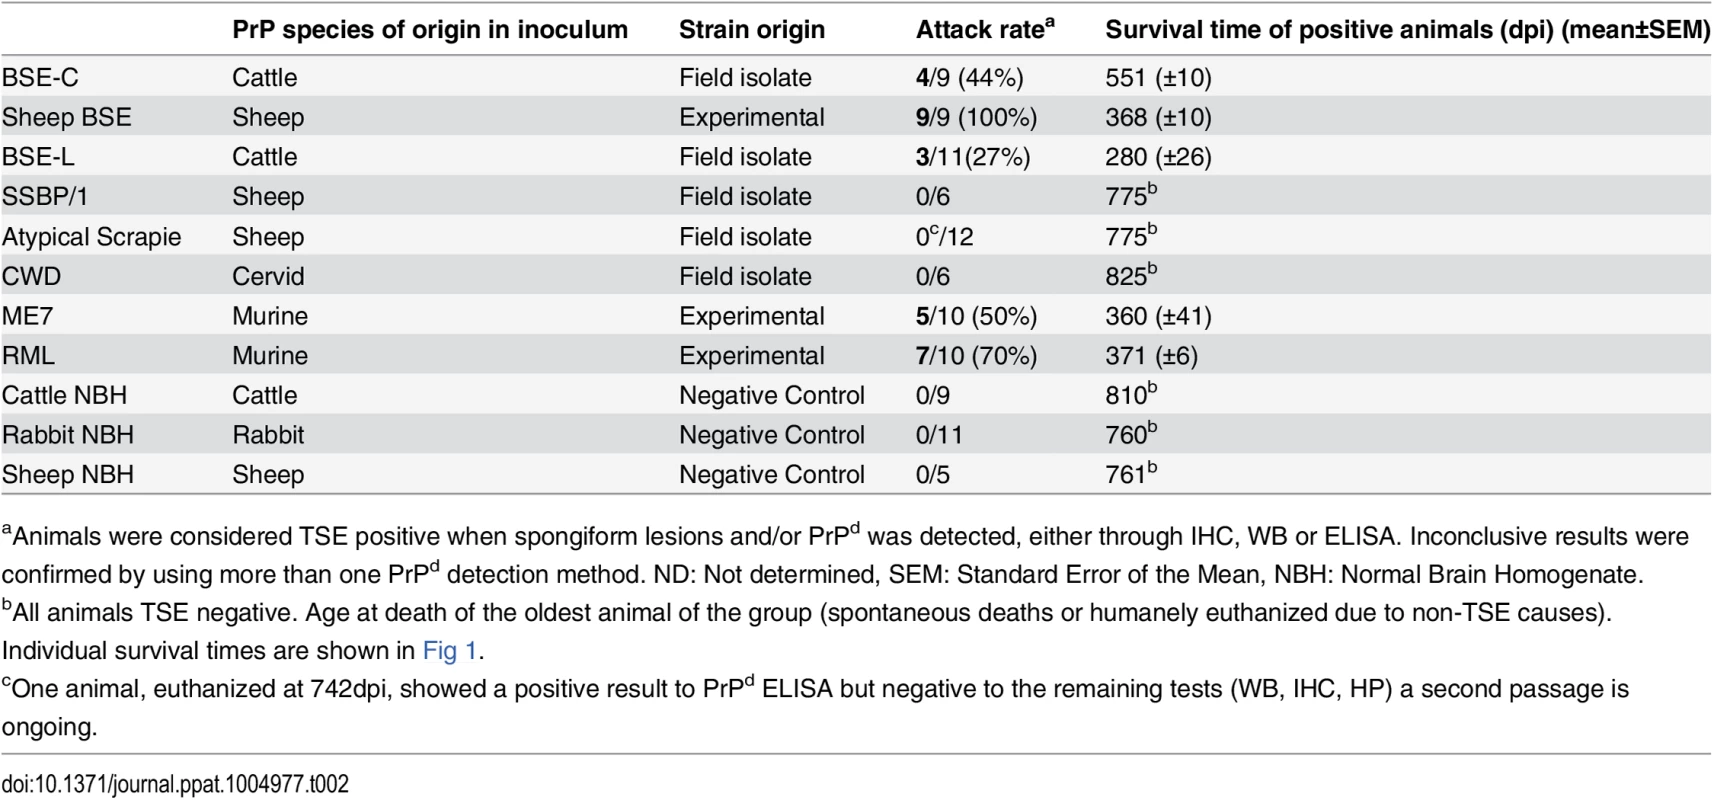 Attack rates and survival times (±SEM) of the inoculated <i>TgRab</i> mice.